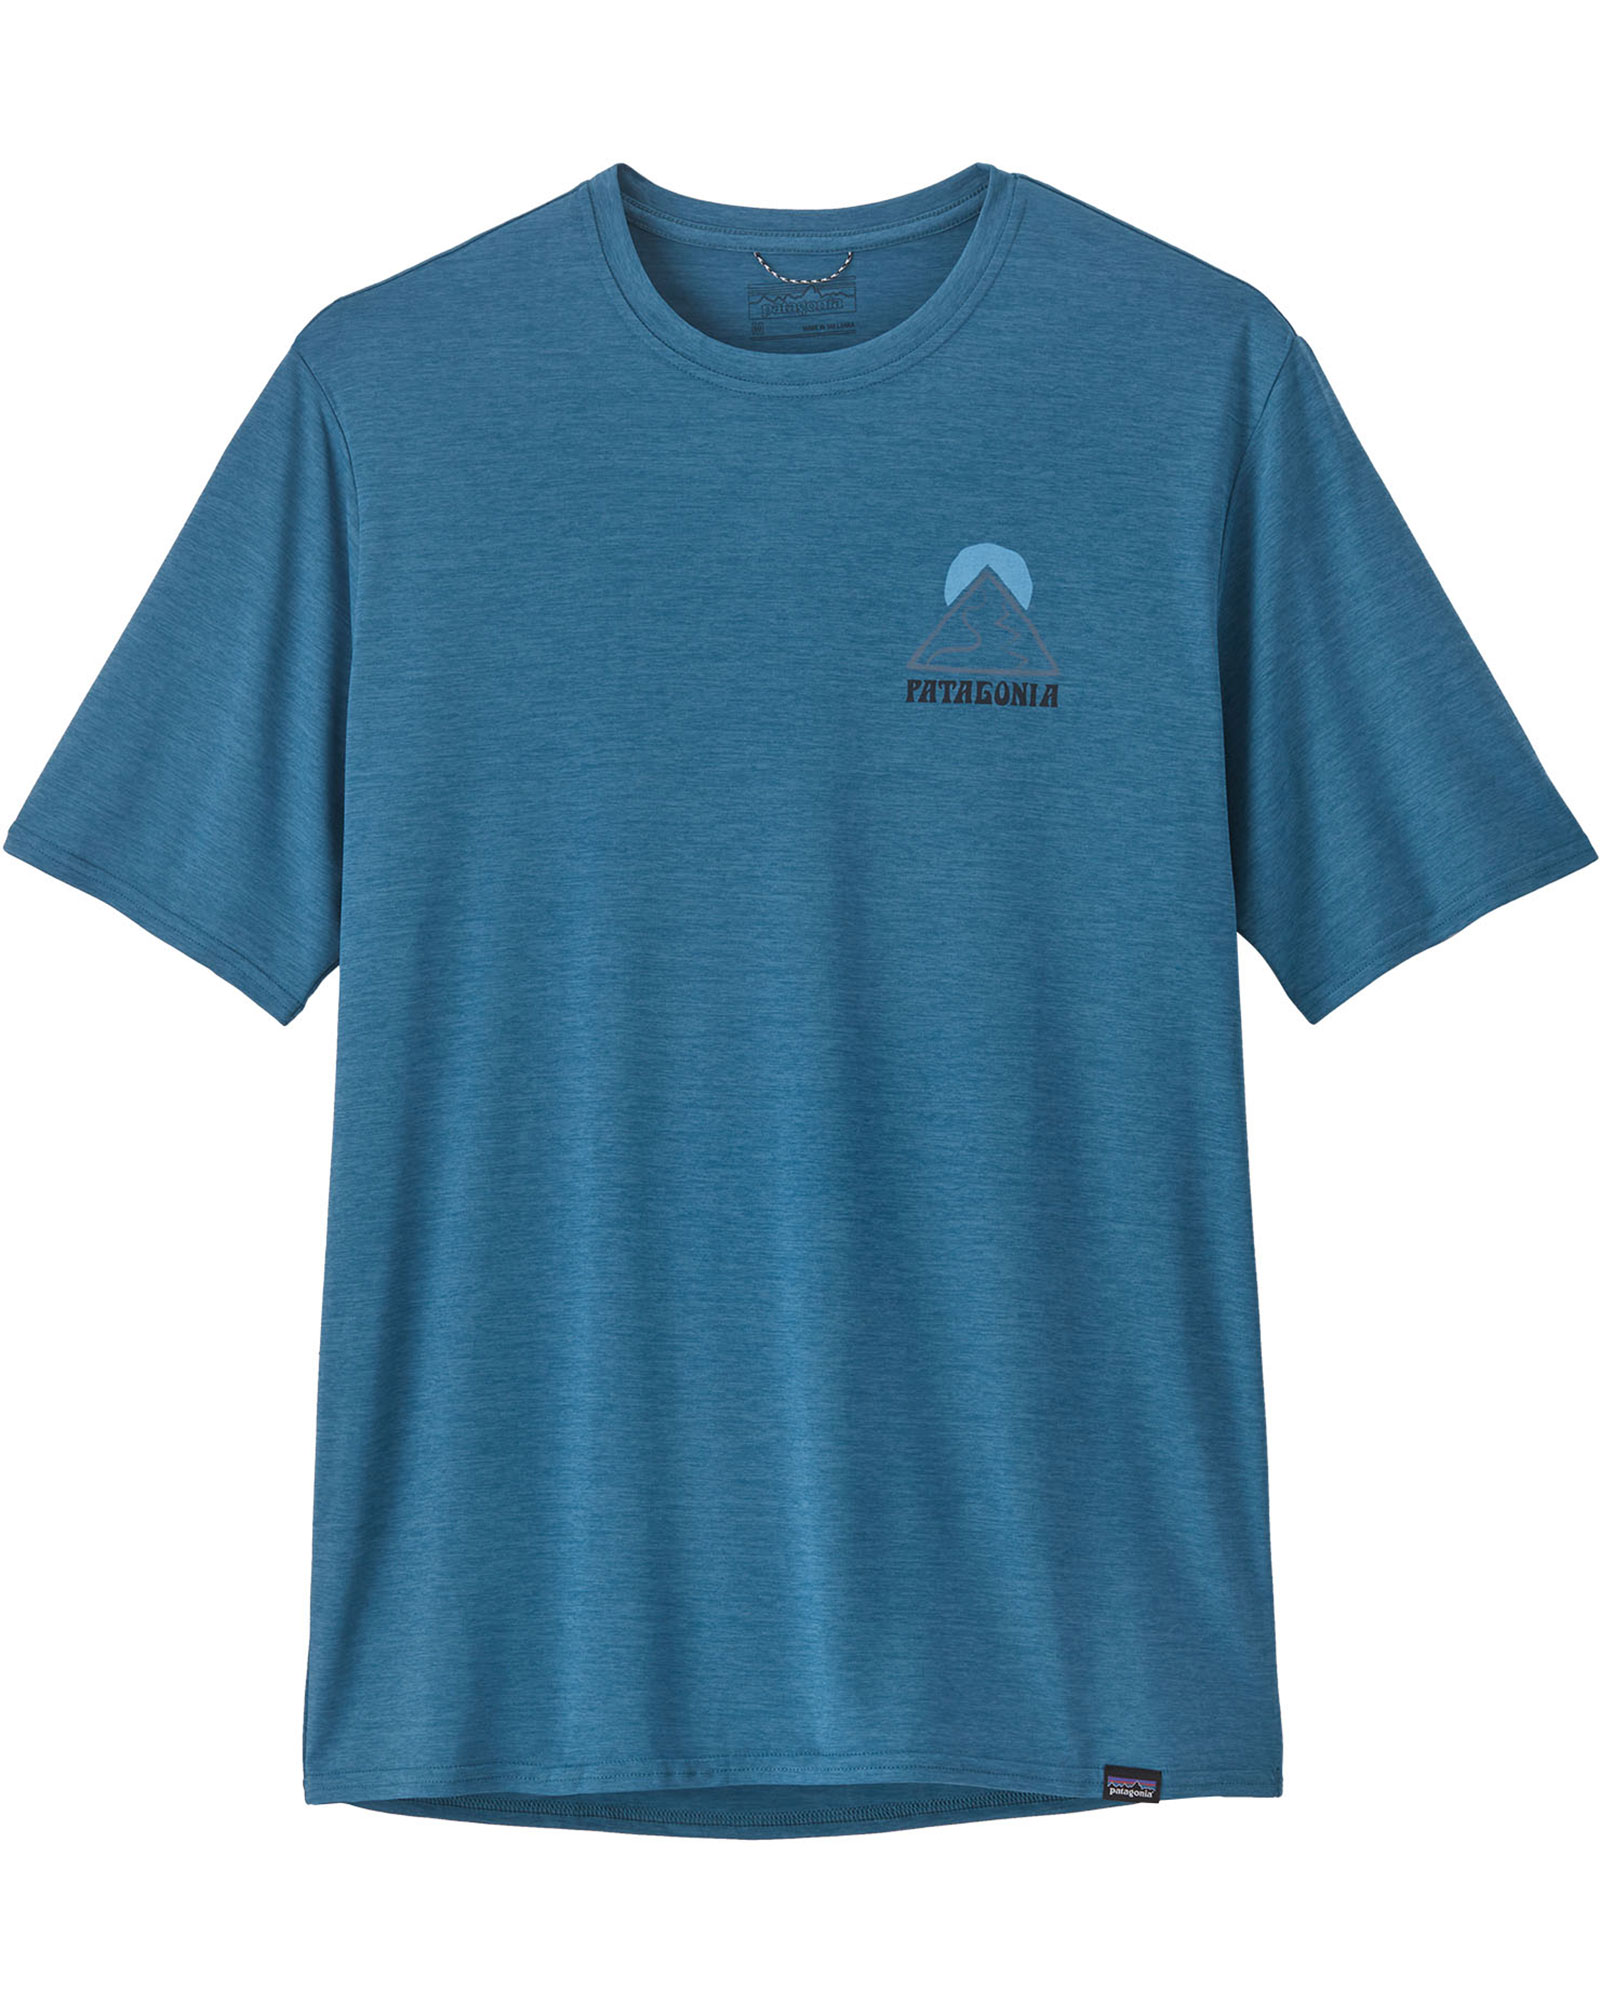 Patagonia Cap Cool Daily Graphic Men’s Tee - Wavy Blue/Slow Going S